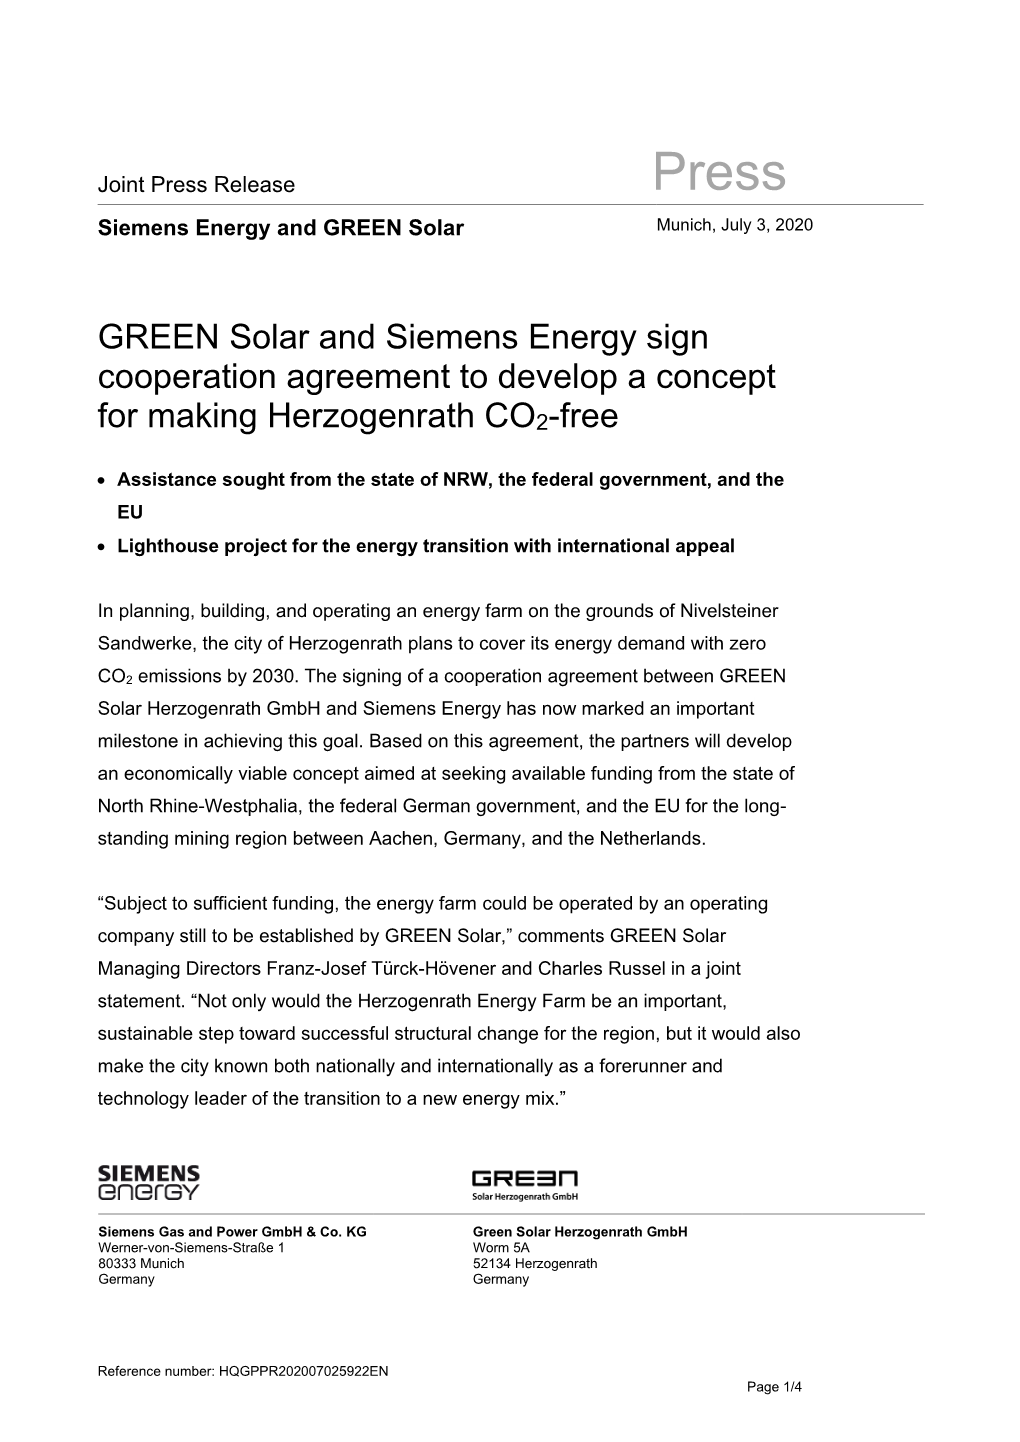 GREEN Solar and Siemens Energy Sign Cooperation Agreement to Develop a Concept for Making Herzogenrath CO2-Free